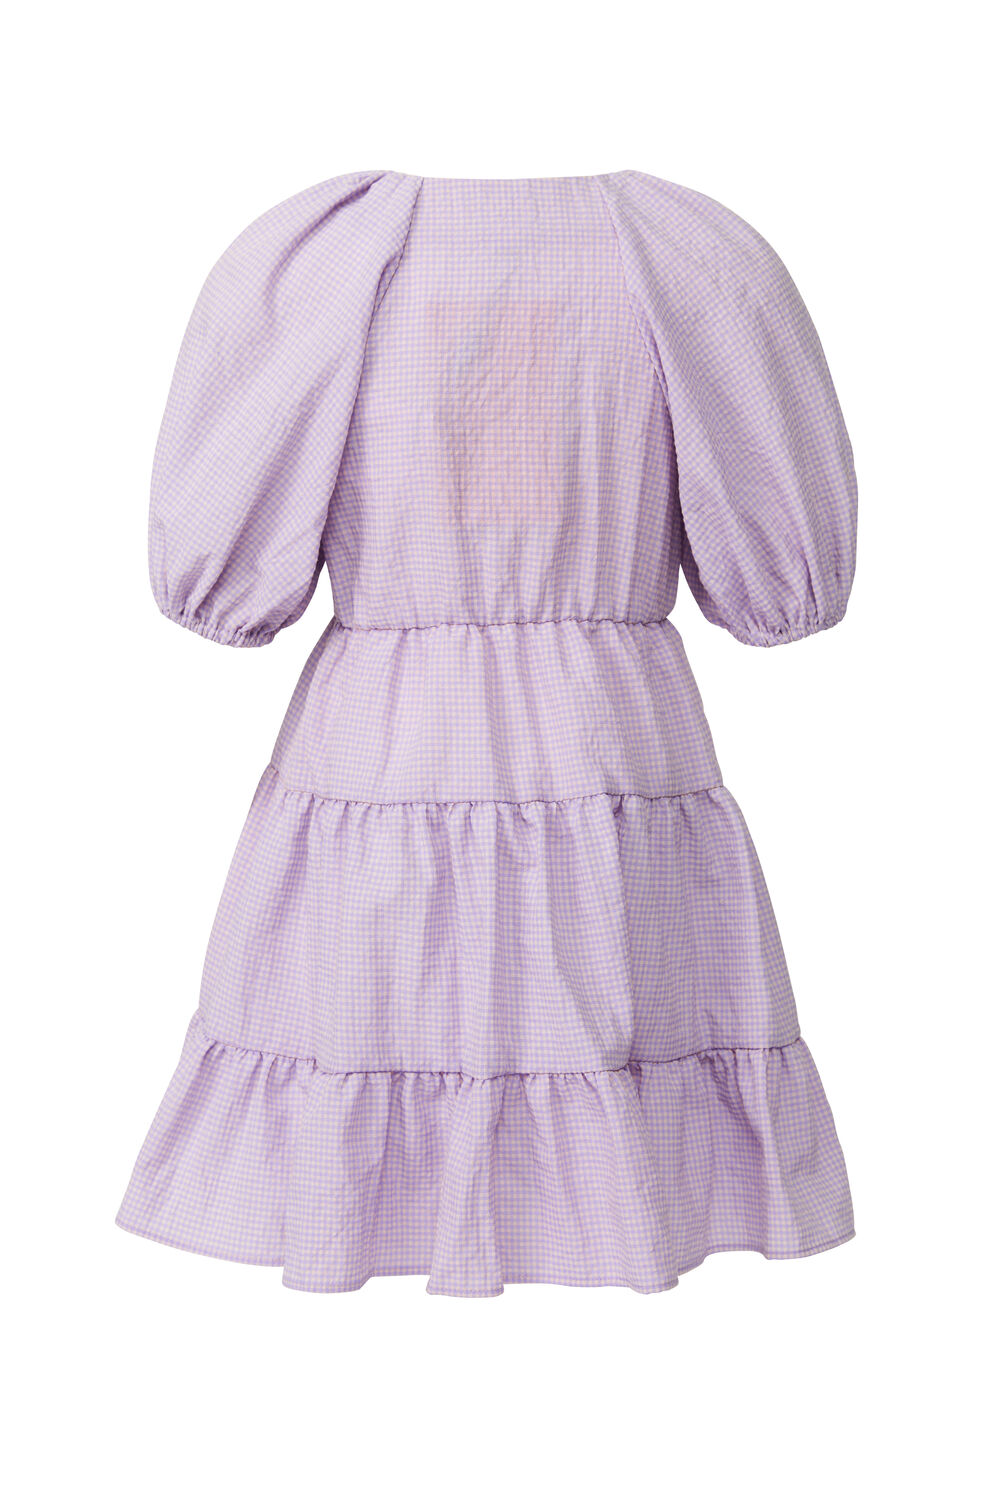 GIRLS MIDI GINGHAM DRESS in colour LILAC SNOW